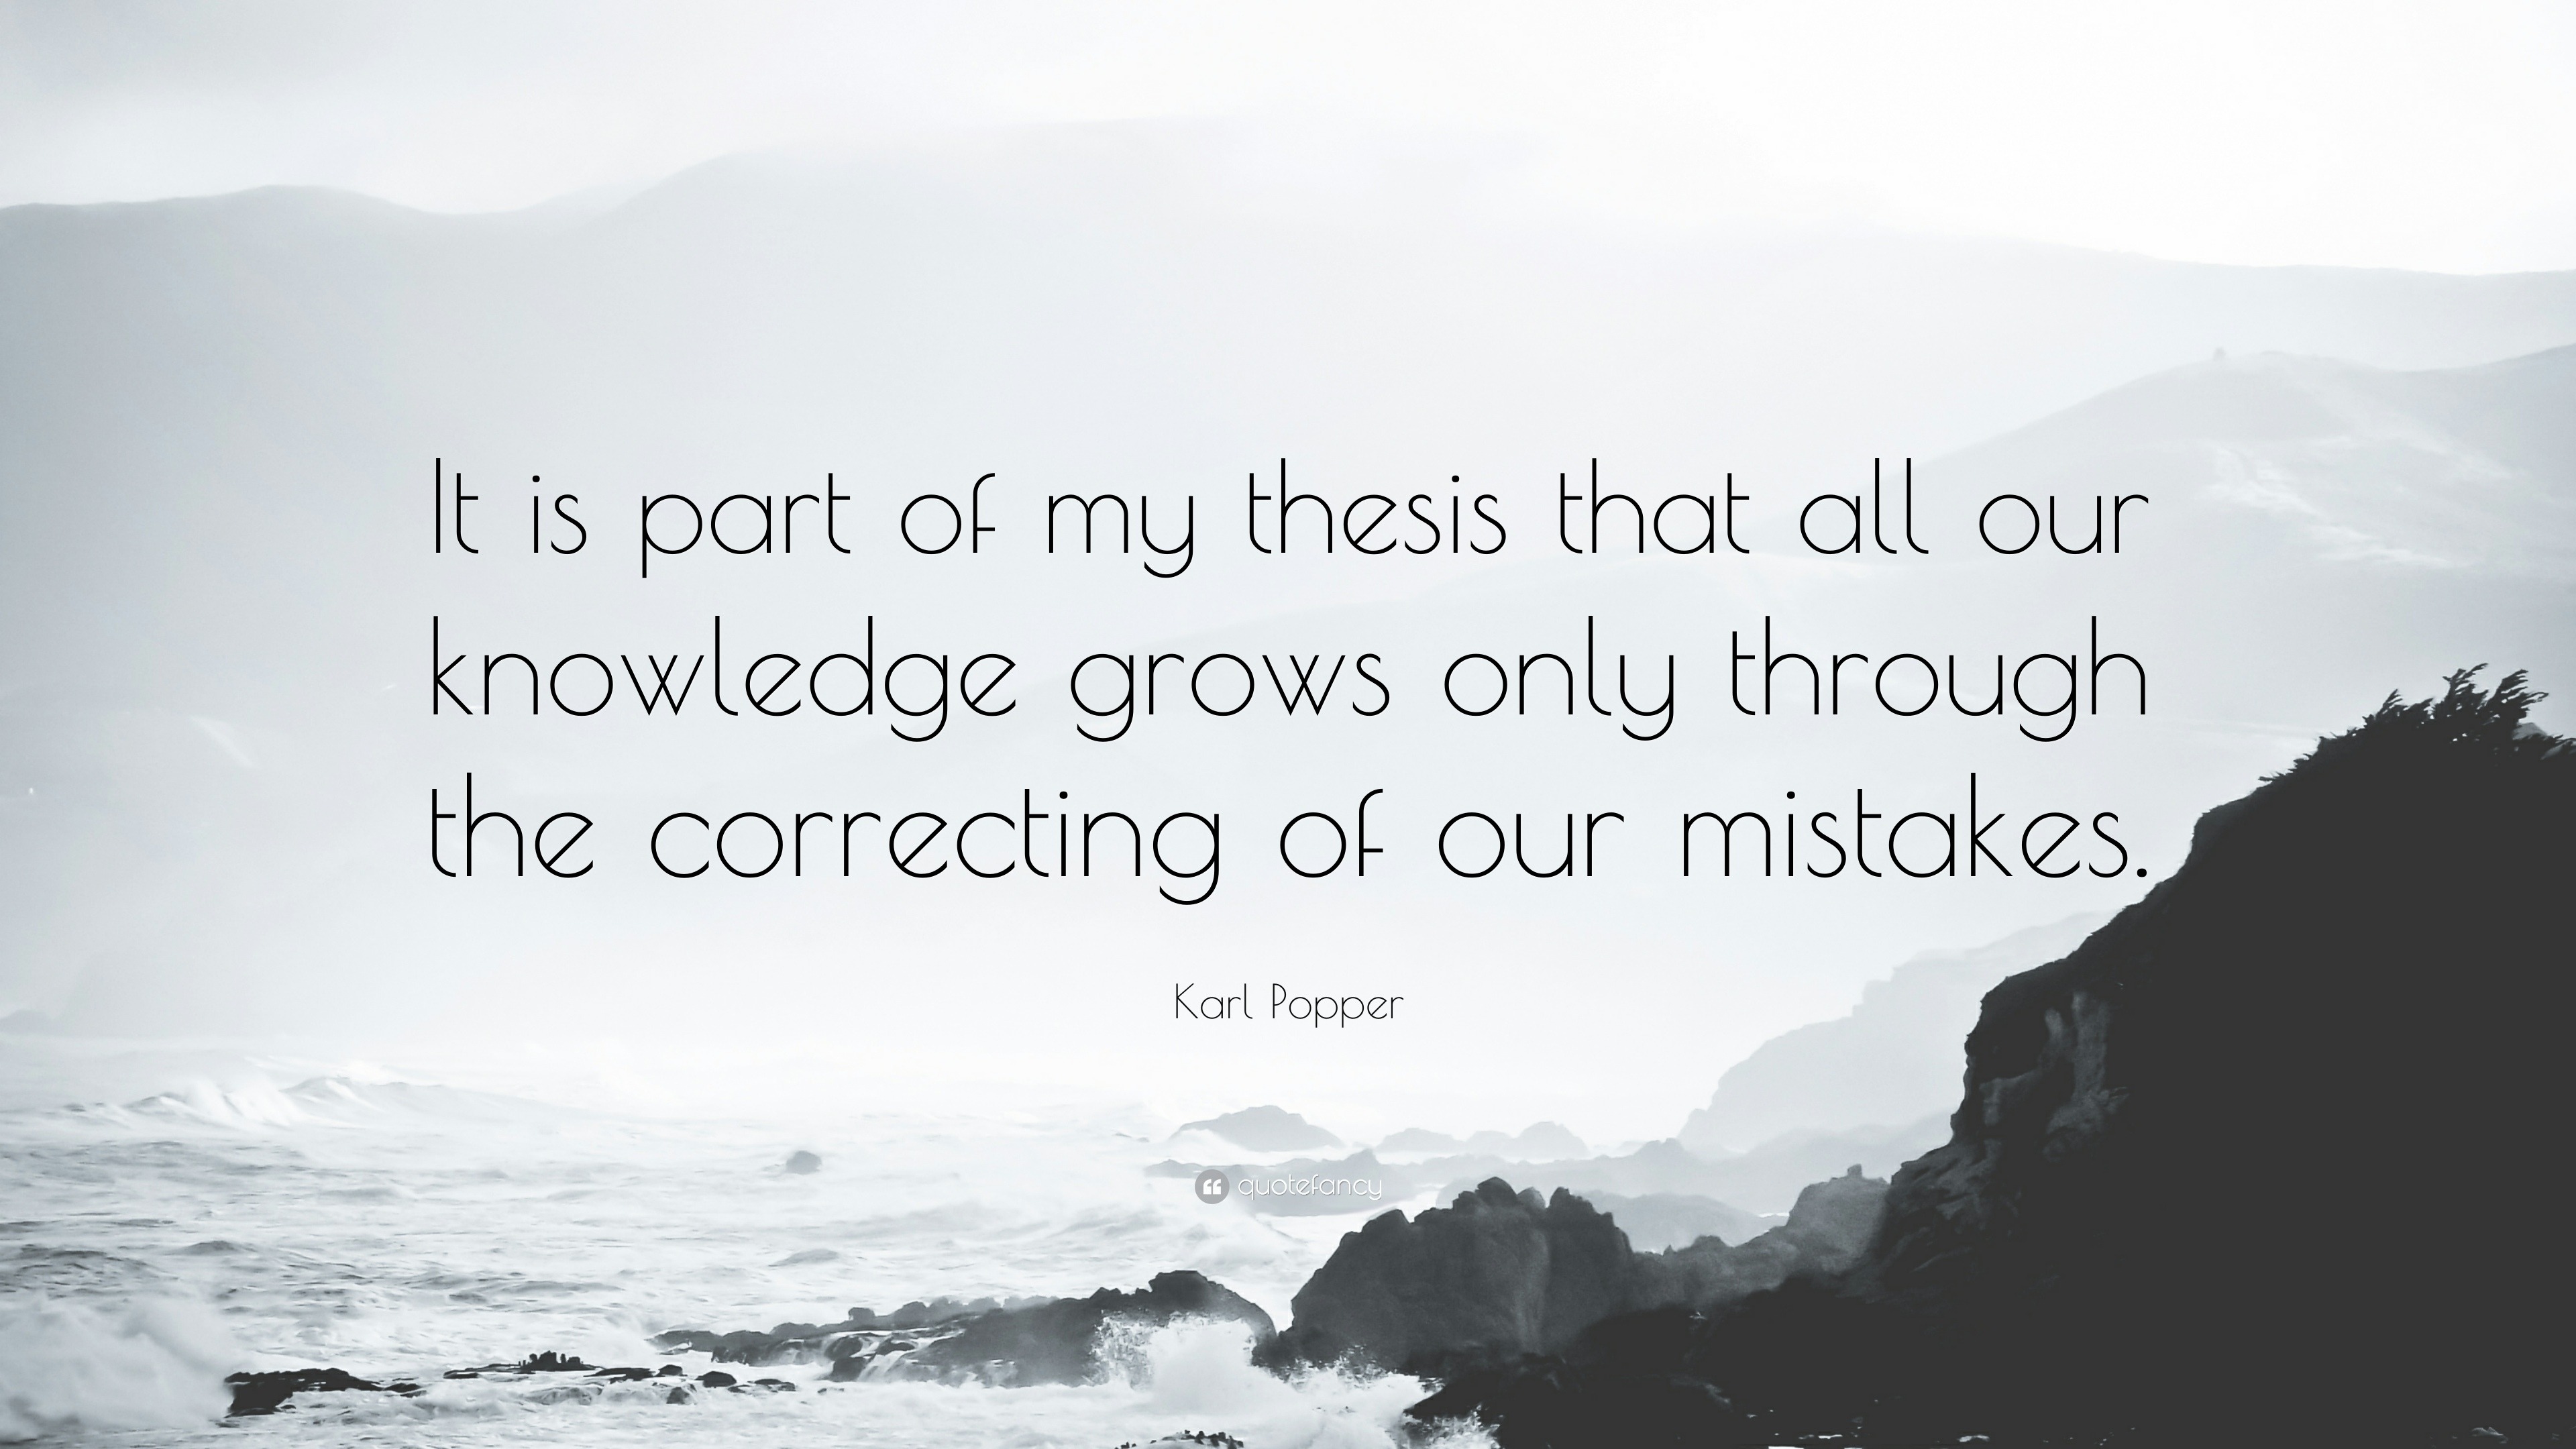 Karl Popper Quote: “It is part of my thesis that all our knowledge ...